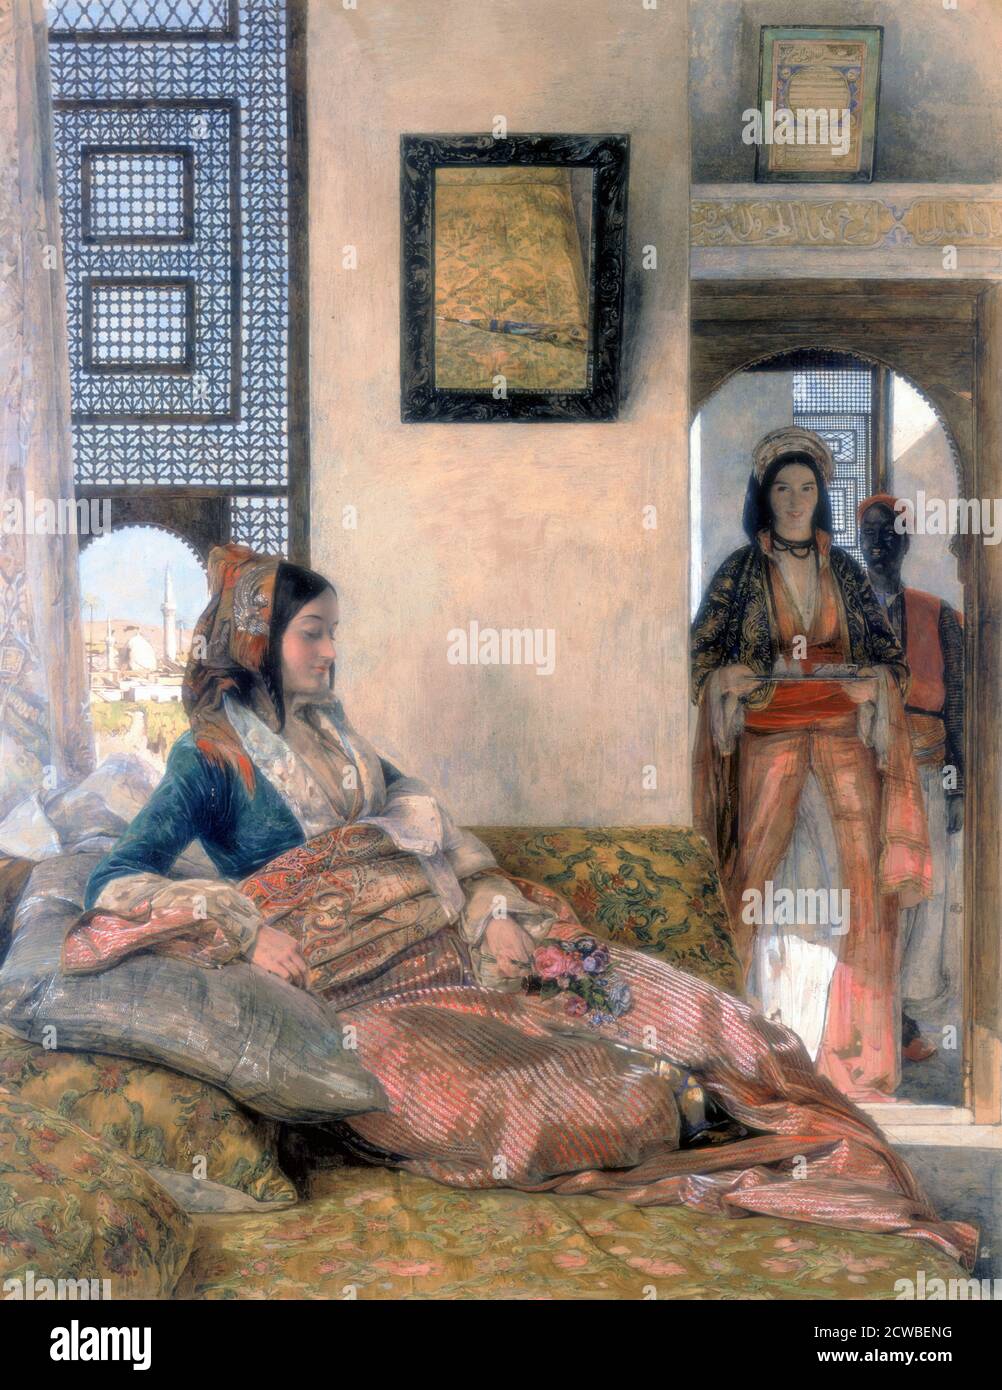 'Life in the Hareem', 1858 Artist: John Frederick Lewis. An Inmate of the Hareem, located in the collection at, Victoria and Albert Museum, London. Stock Photo